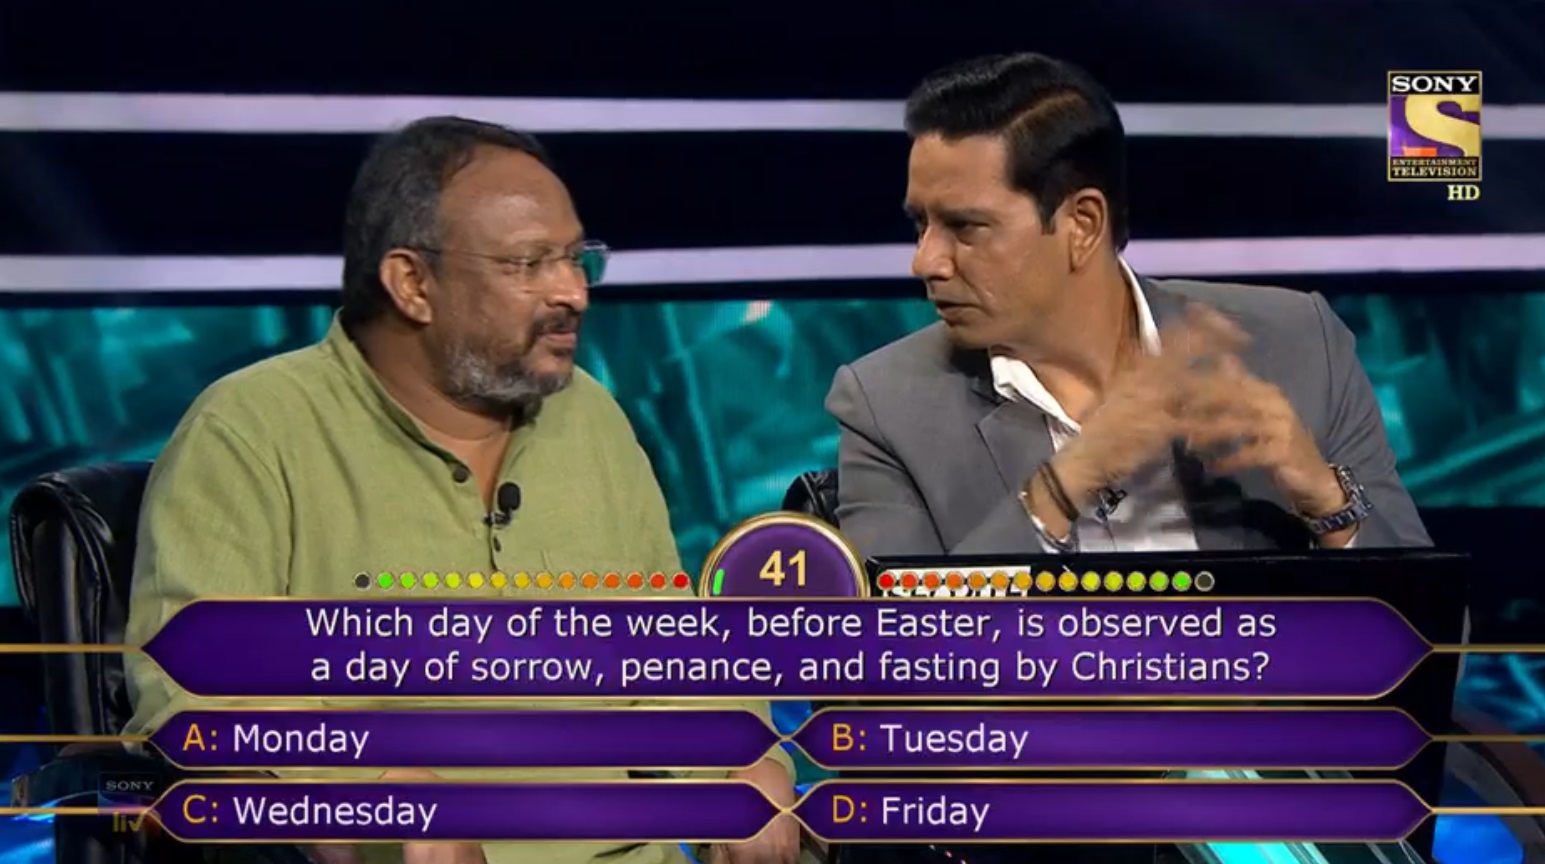 Ques : Which day of the week, before Easter, is observed as a day of sorrow, penance, and fasting by Christians?